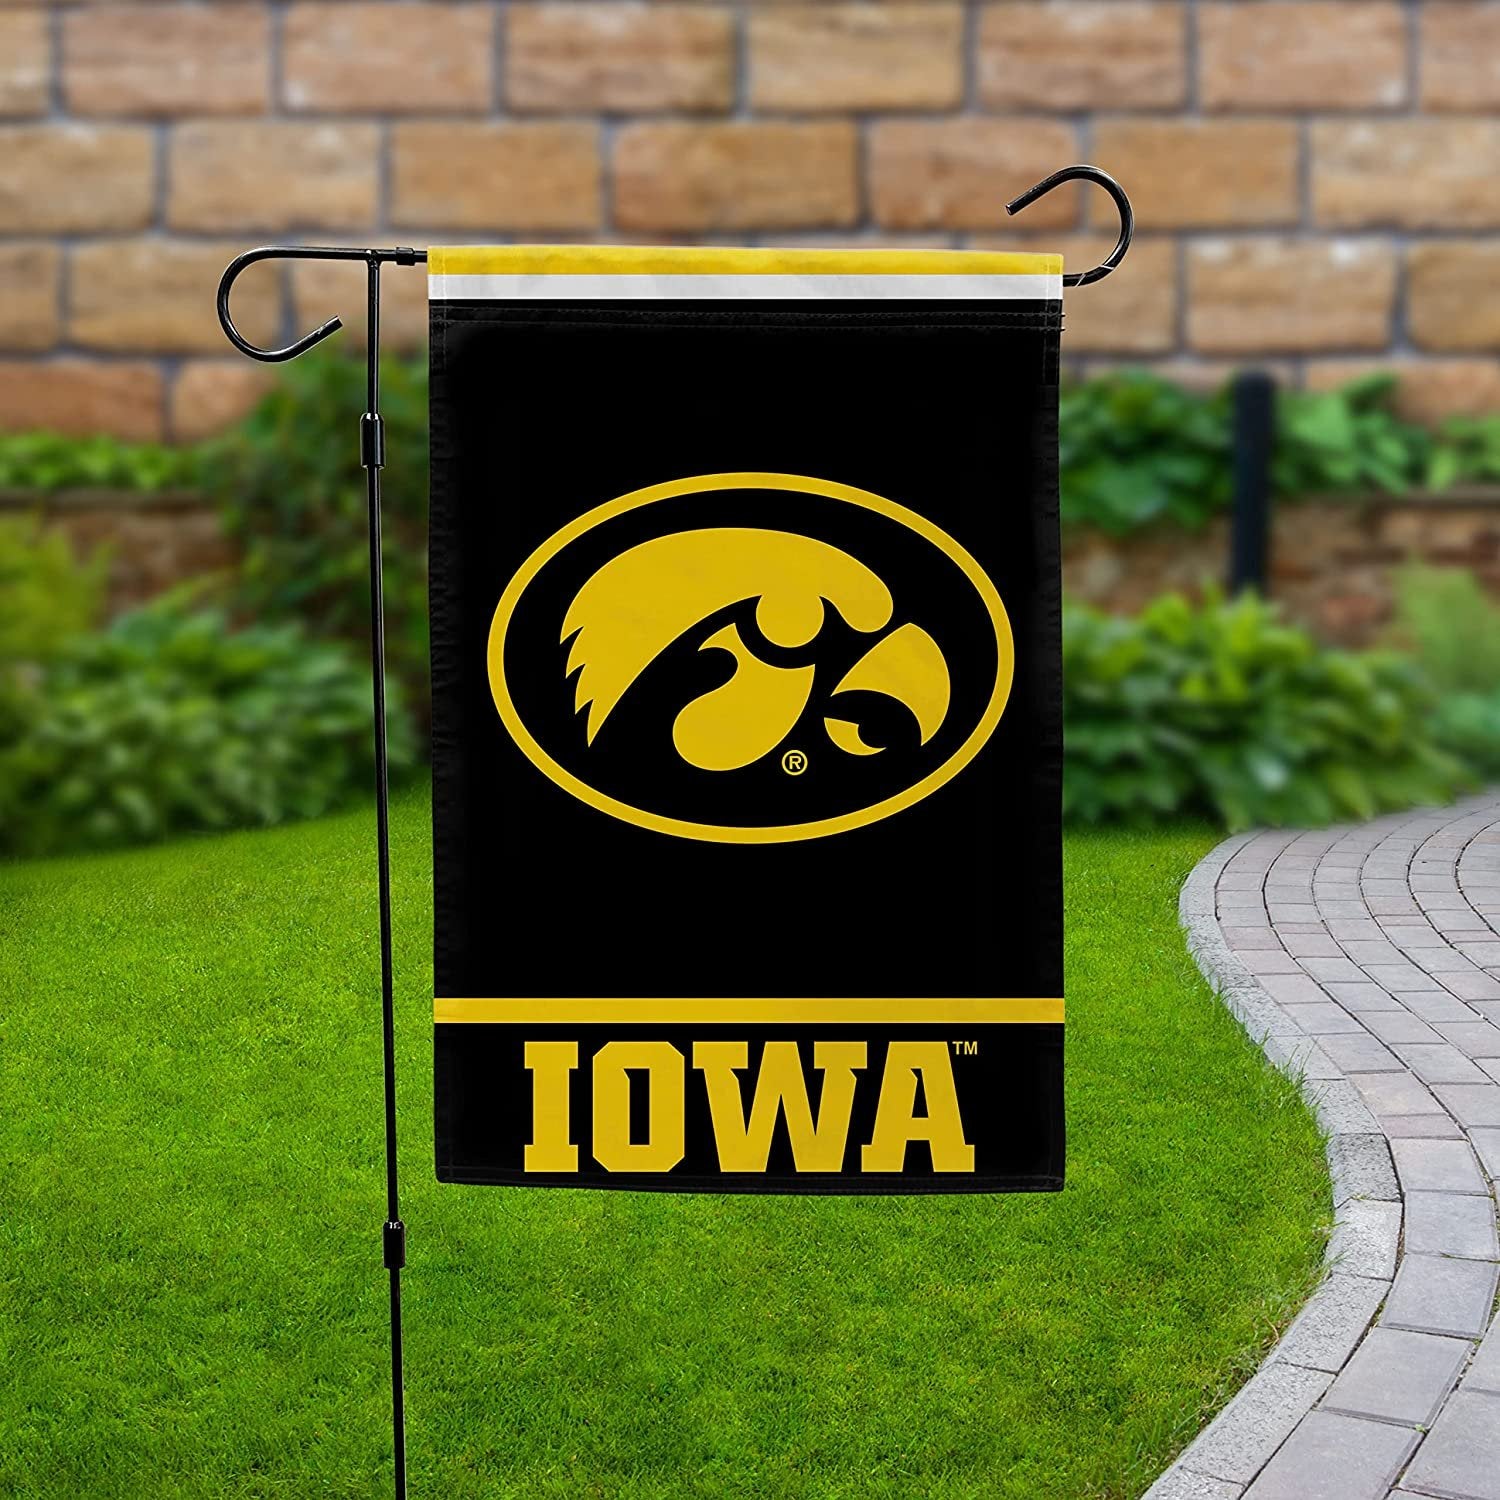 University of Iowa Hawkeyes Double Sided Garden Flag Banner 12x18 Inch Solid Design